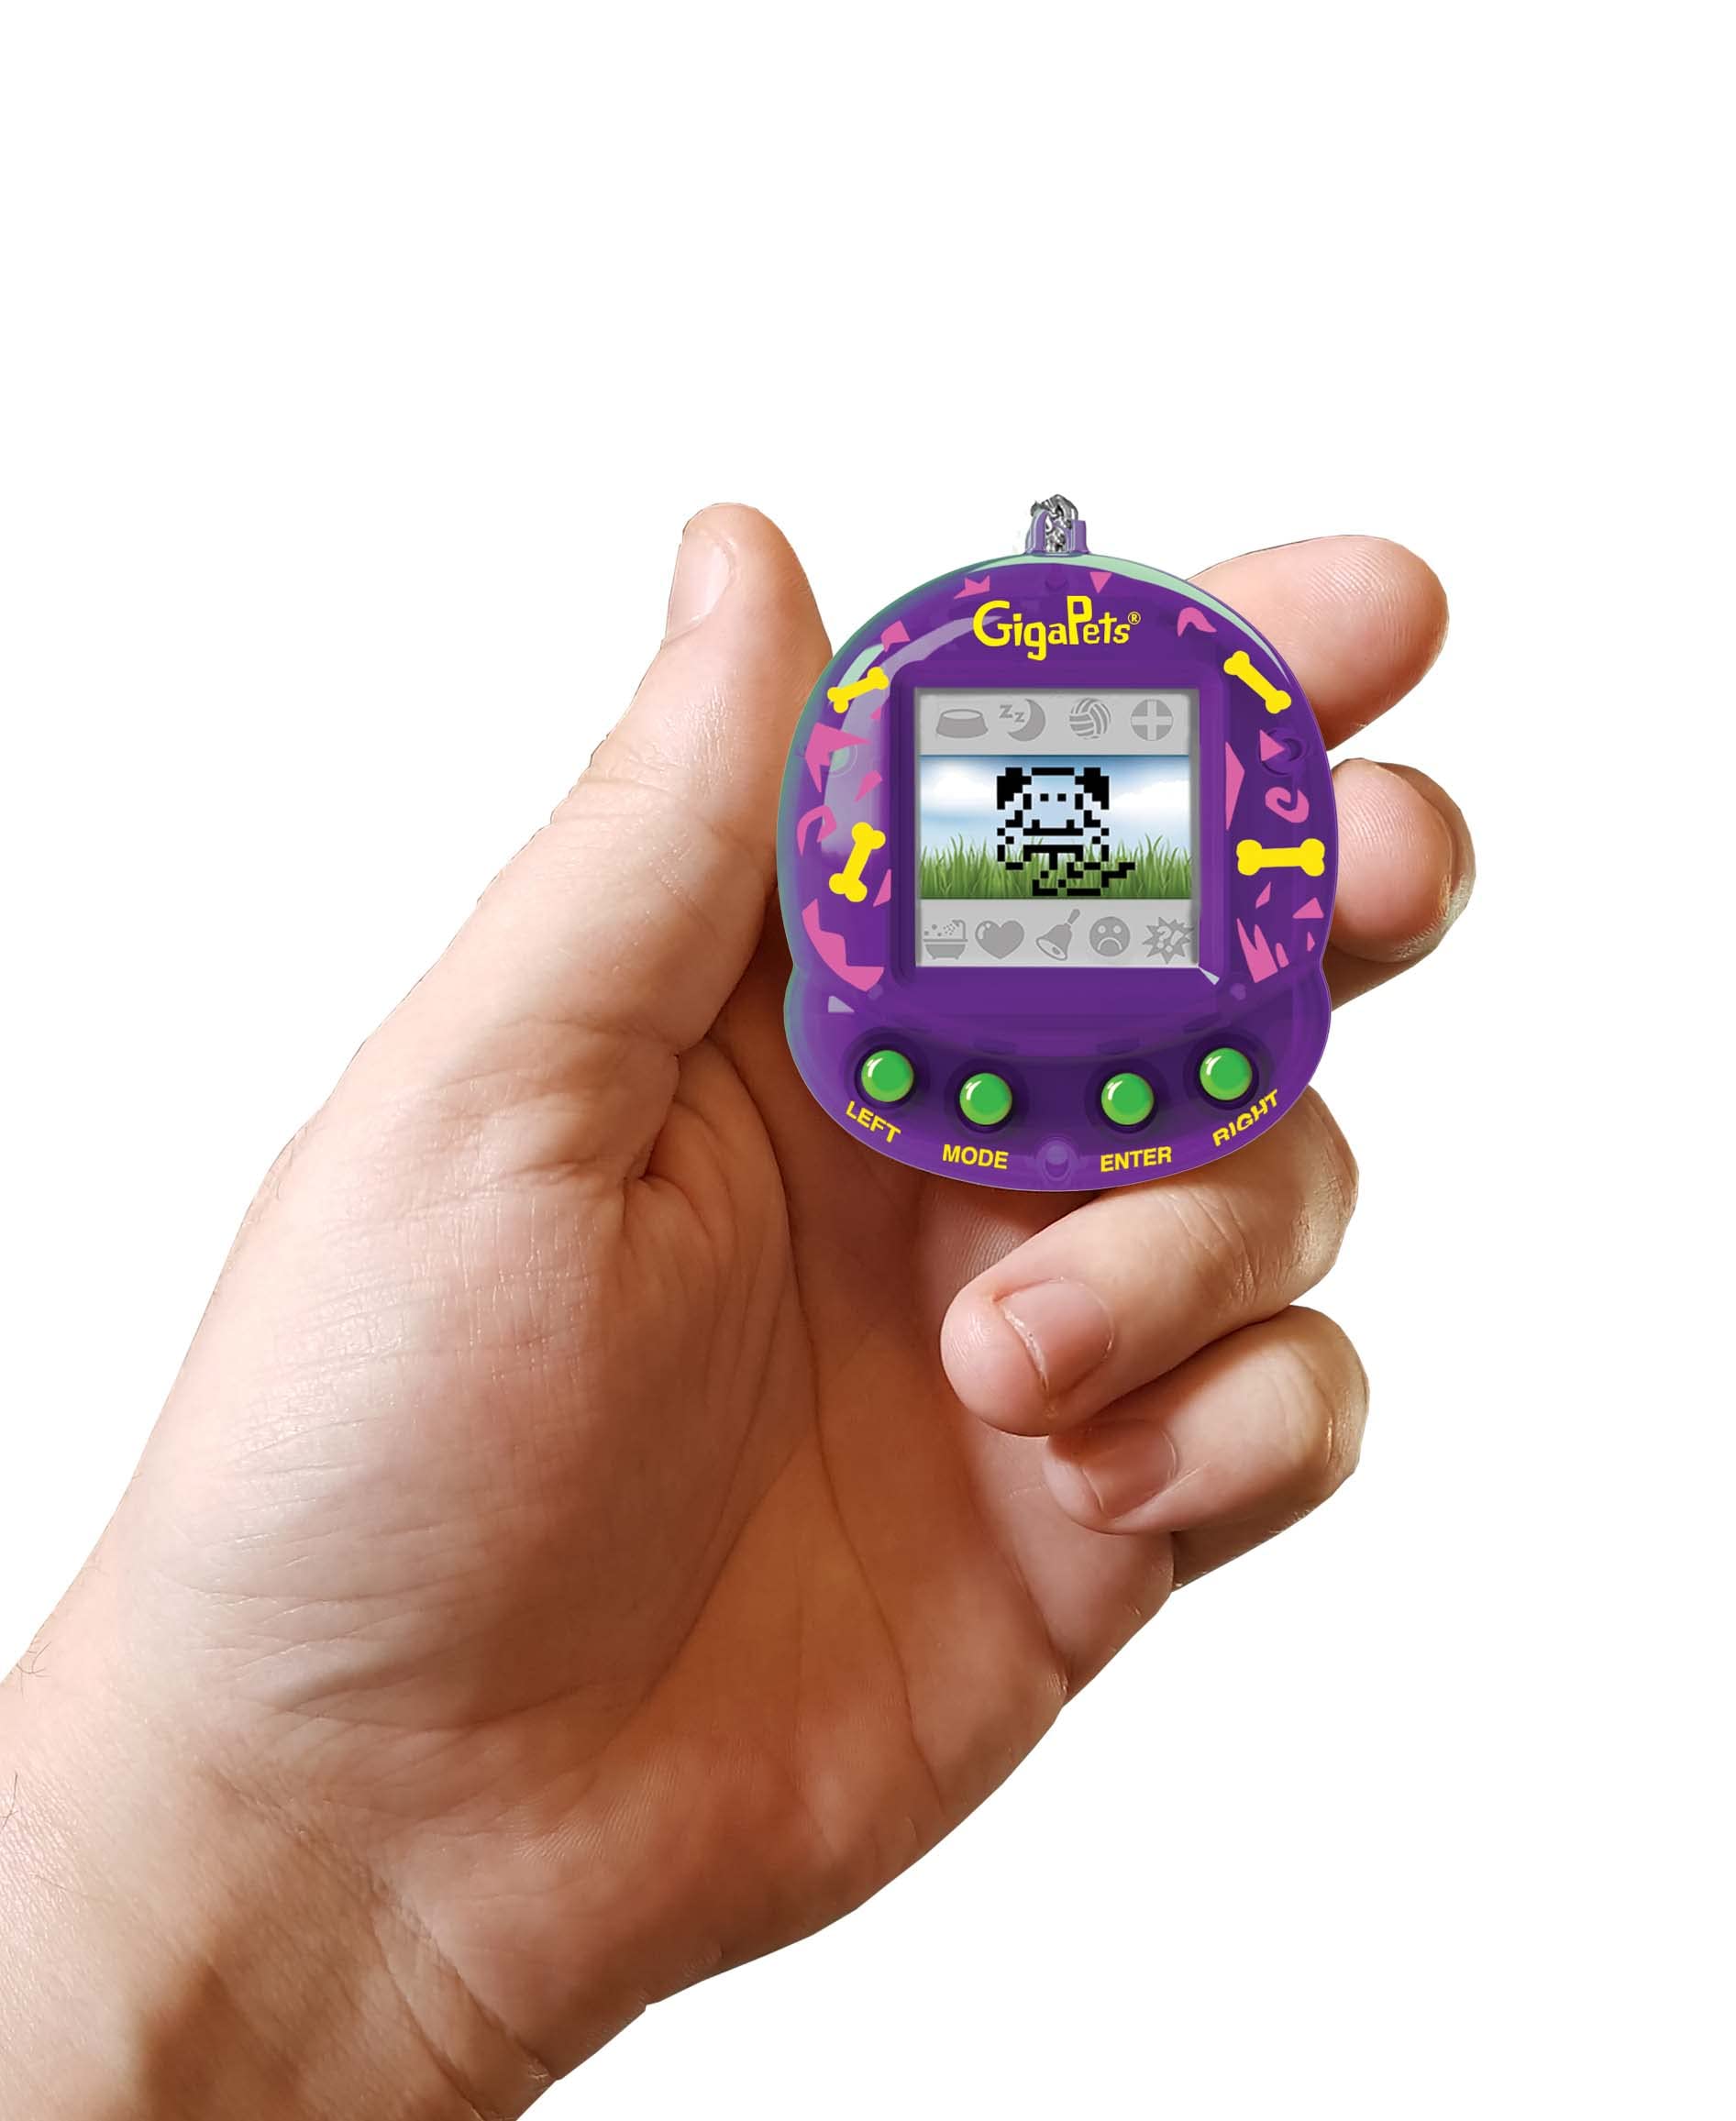 Giga Pets Puppy Dog Virtual Animal Pet Toy, Upgraded Collector’s Edition, Glossy New Purple Housing Shell Nostalgic 90s Toy, 3D Pet Live in Motion